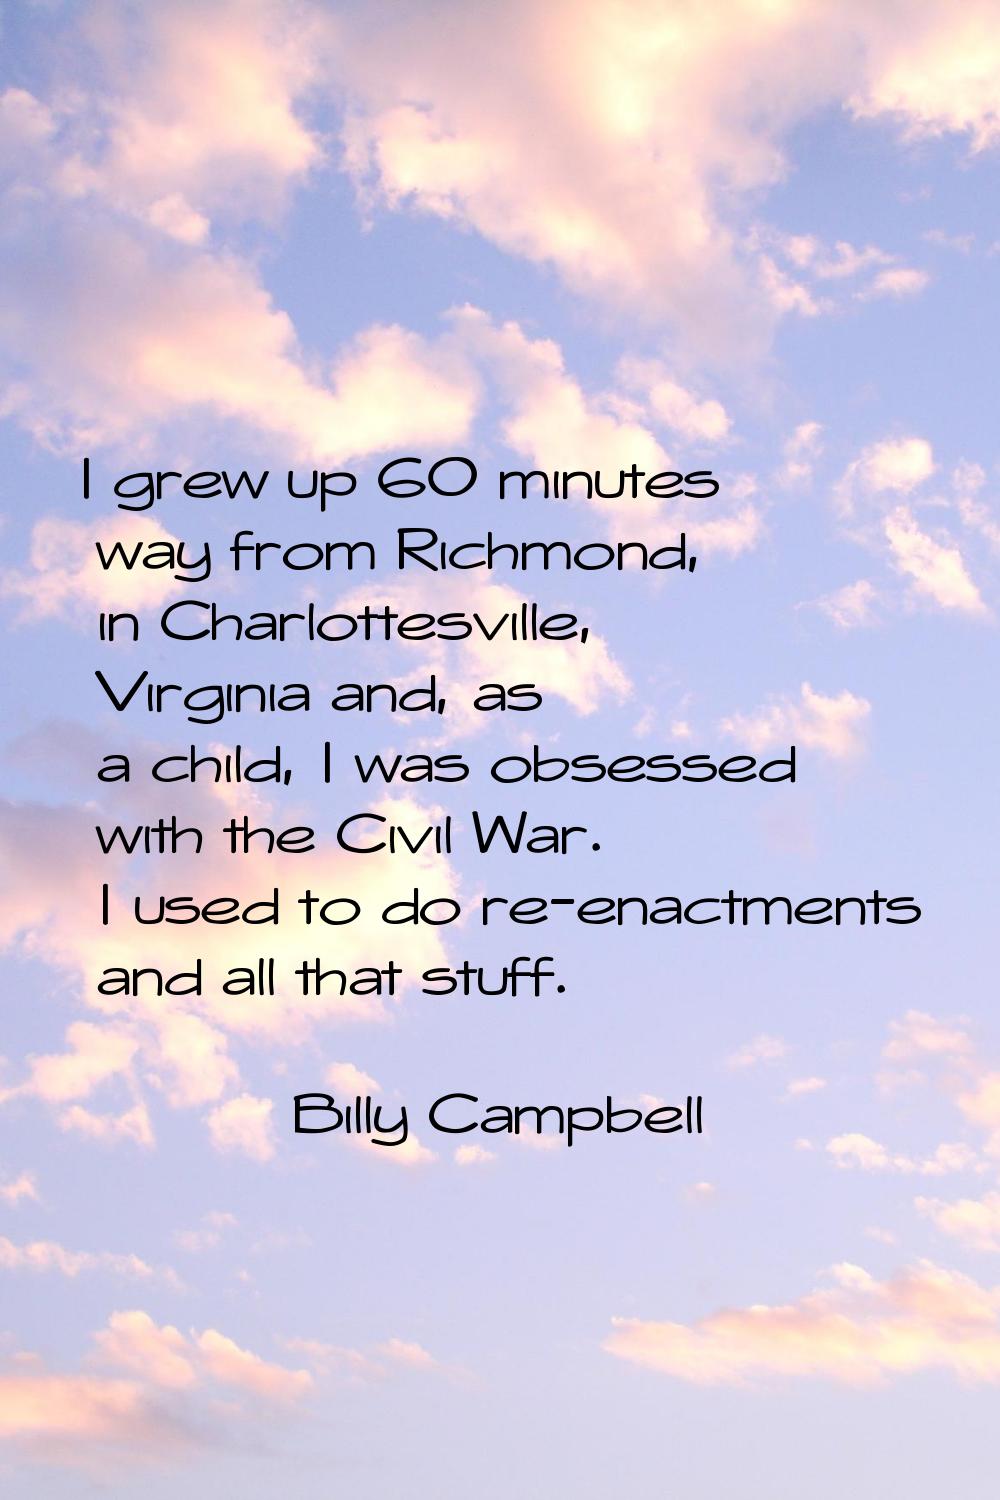 I grew up 60 minutes way from Richmond, in Charlottesville, Virginia and, as a child, I was obsesse